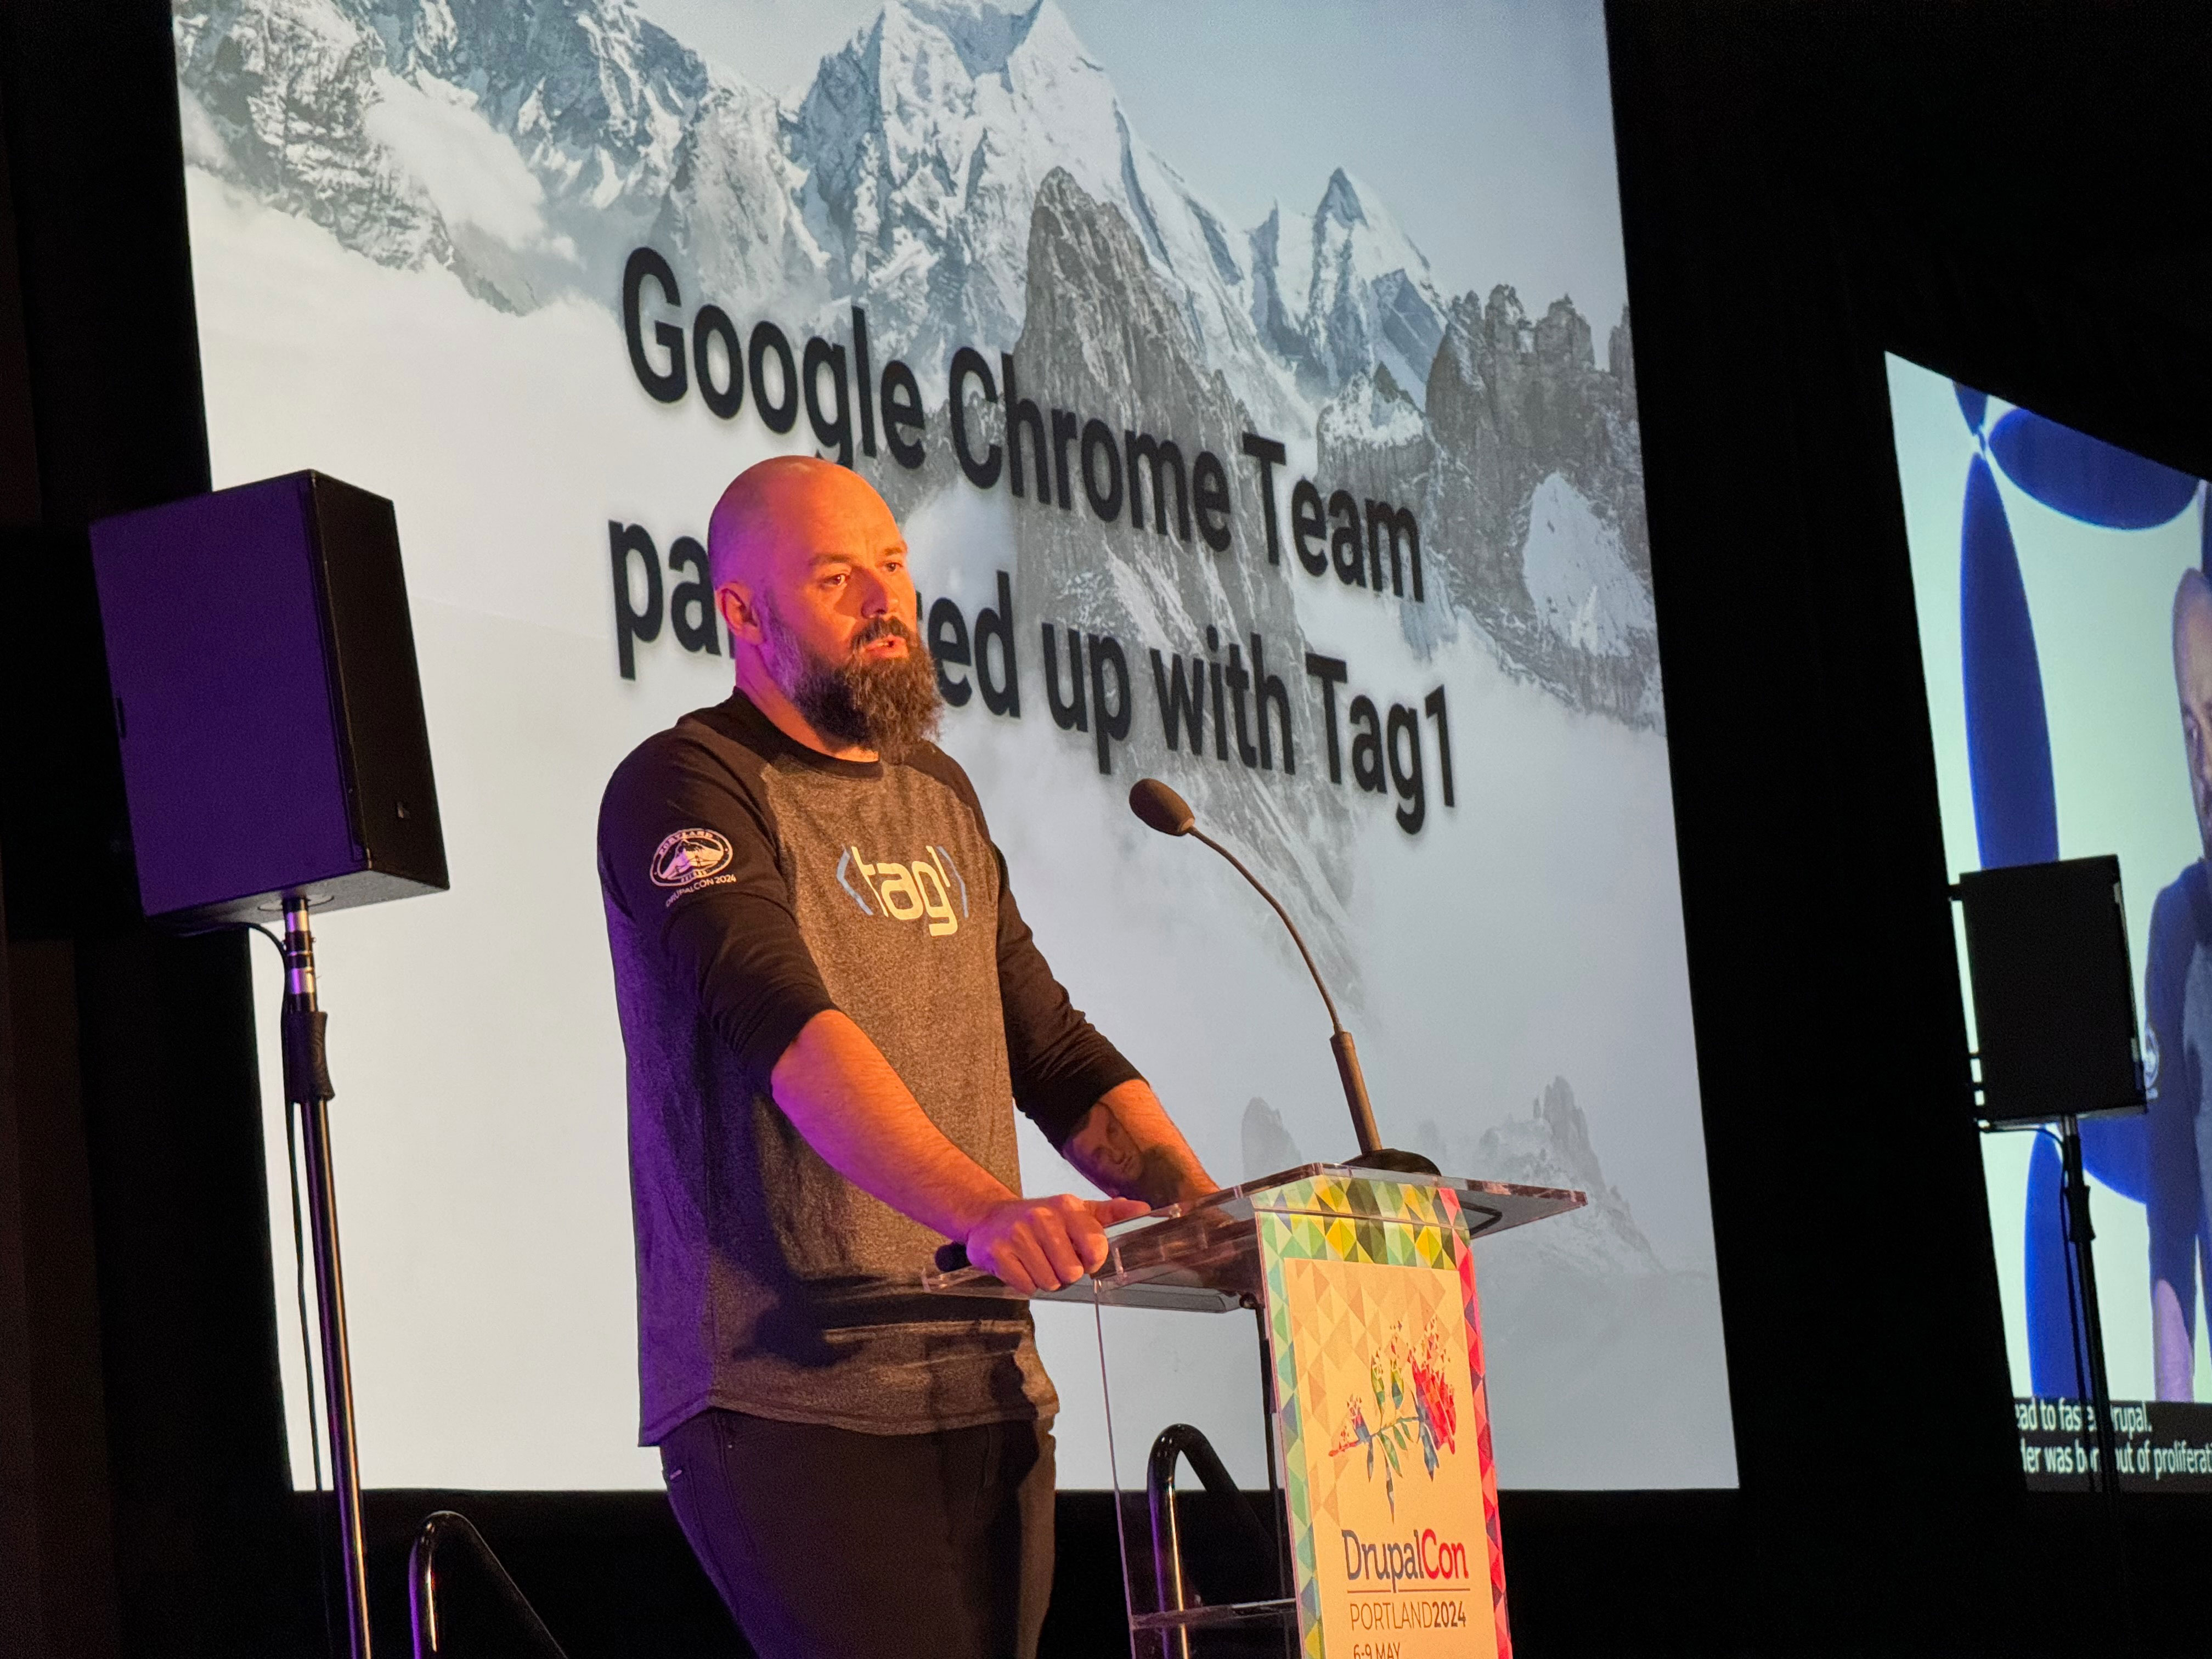 Janez Urevc presents Gander, a joint venture with Google Chrome Team, during the Initiatives Keynote at DrupalCon Portland